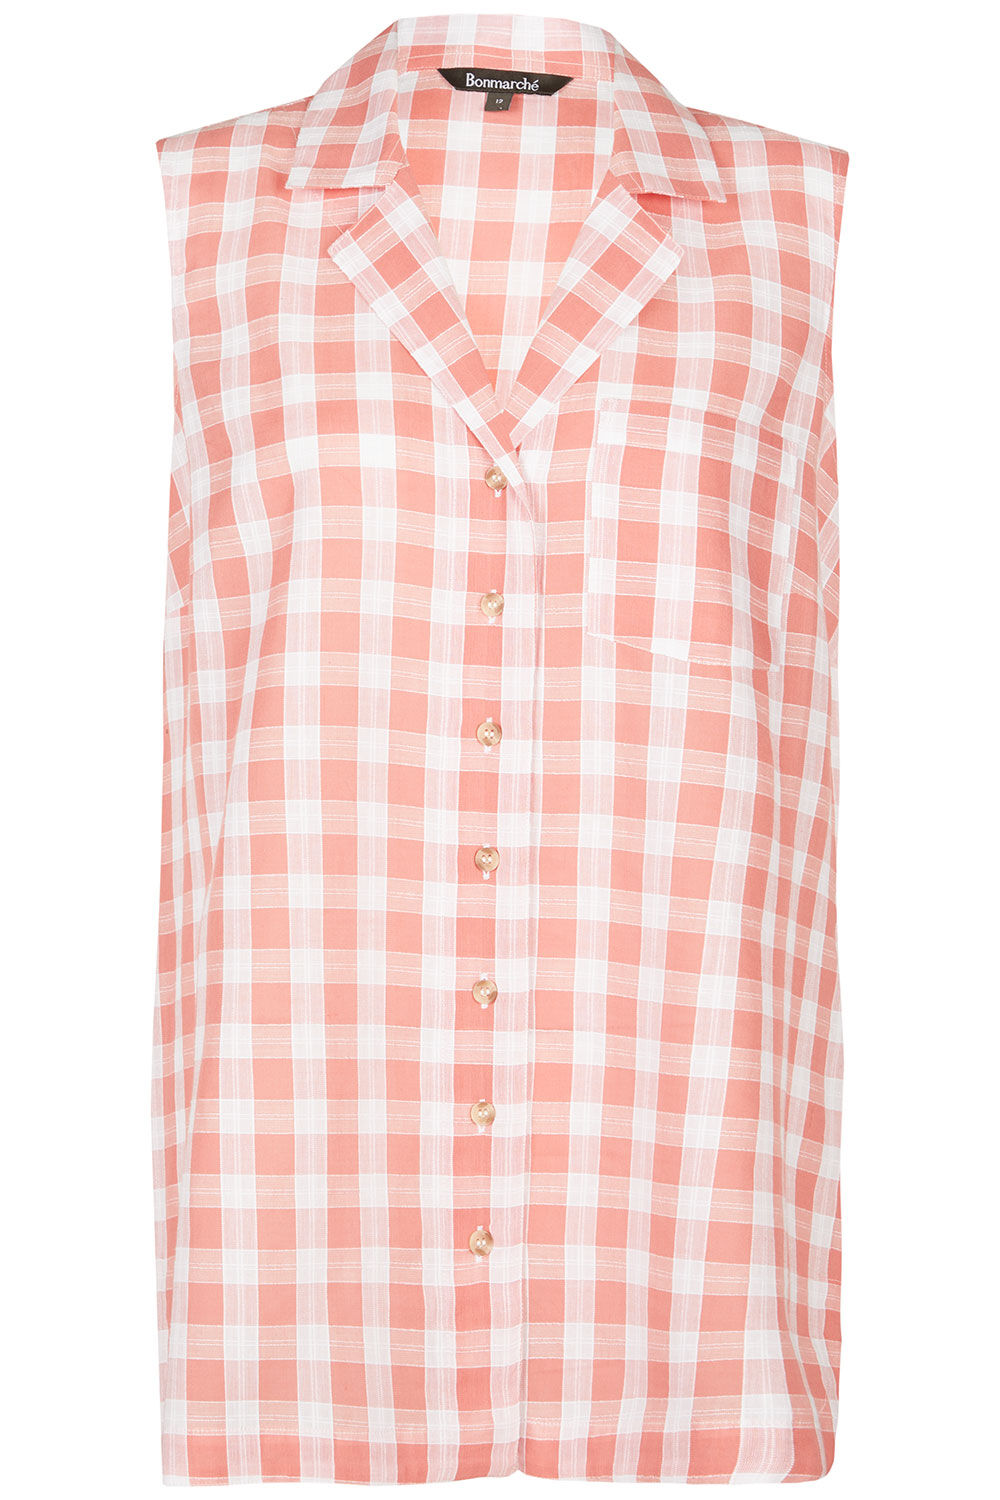 Bonmarche Coral Sleeveless Gingham Collared Shirt, Size: 10